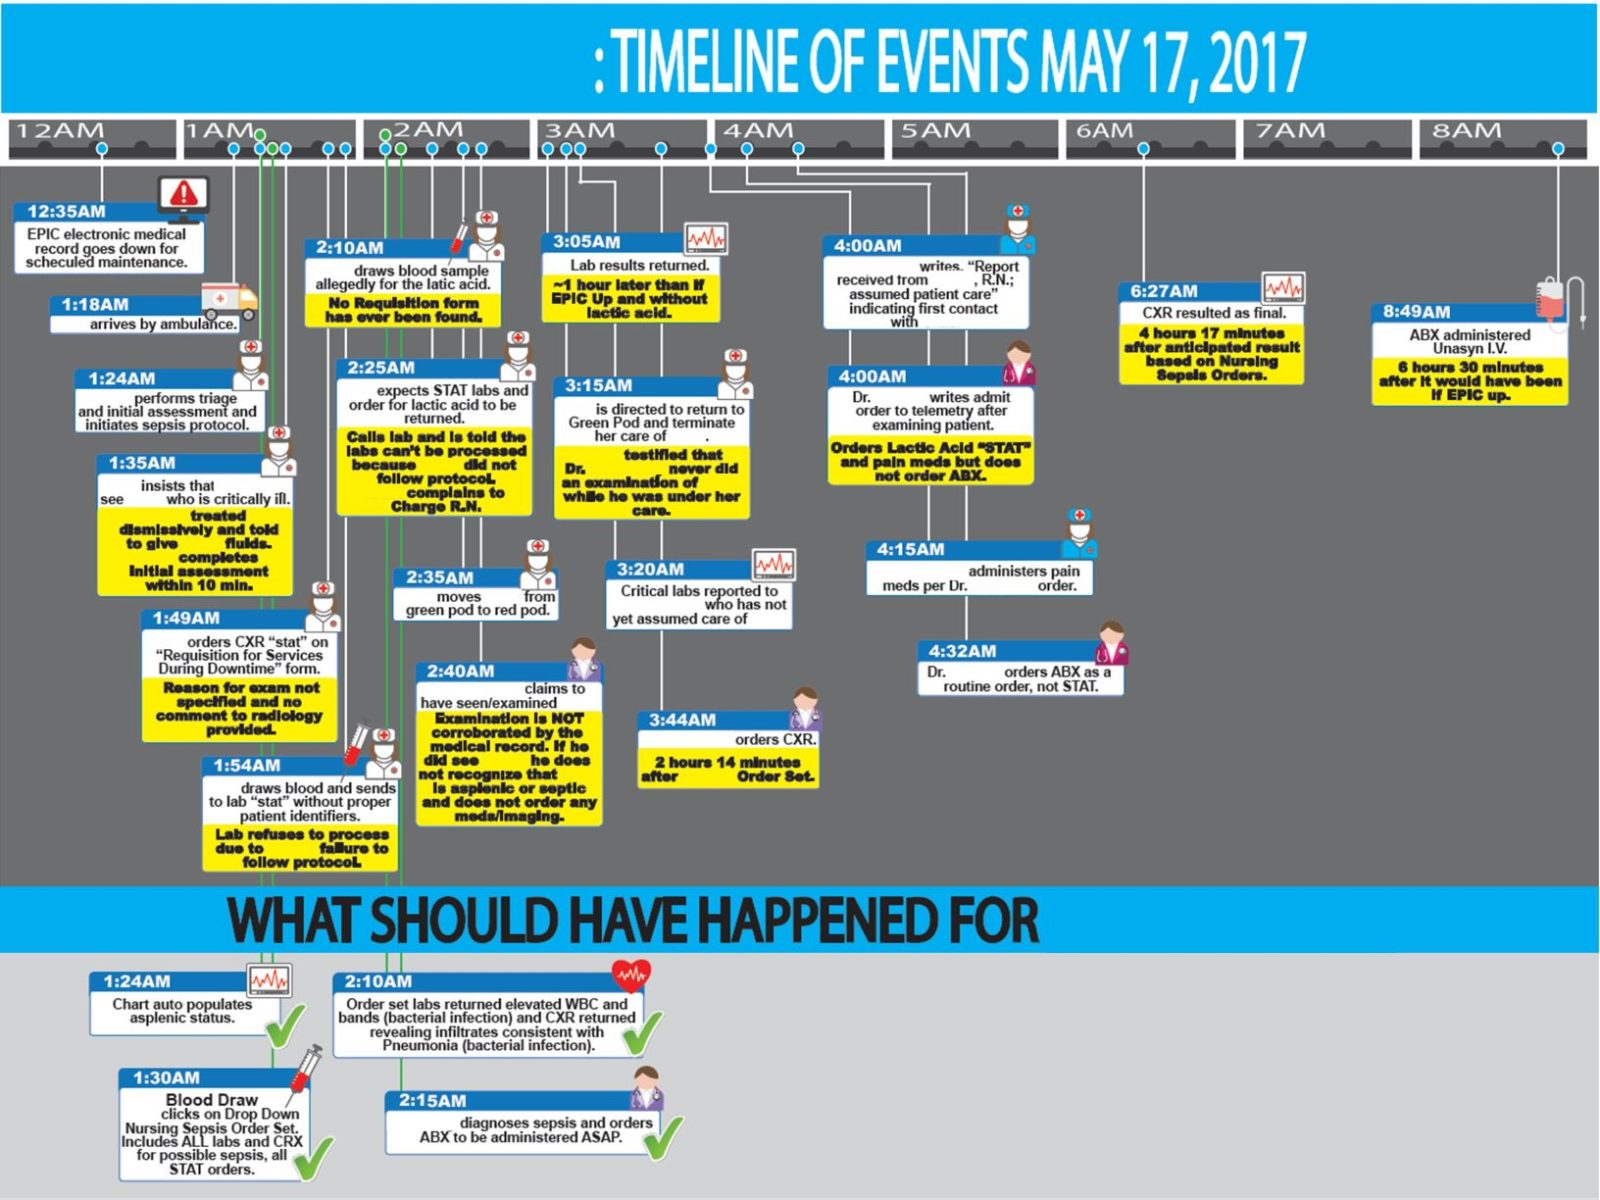 Timeline of a system failure at a hosptial